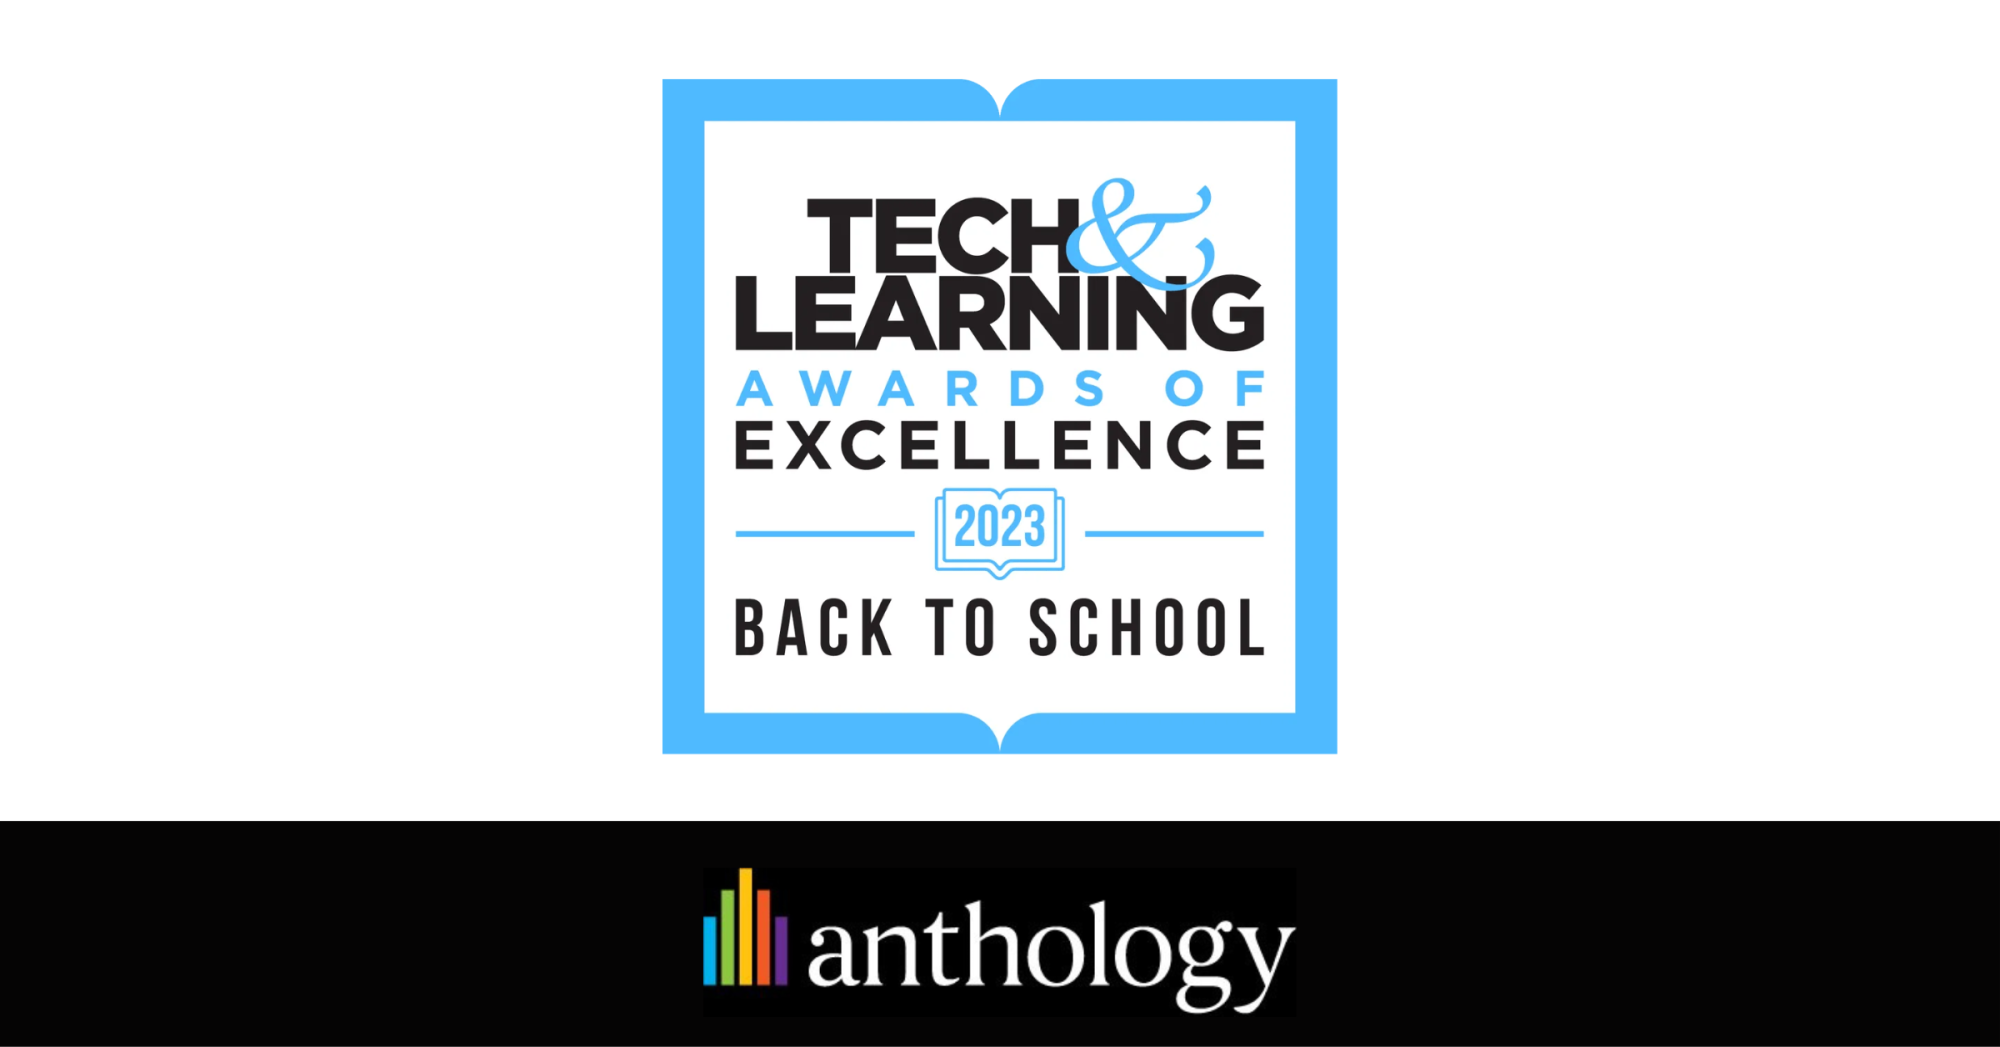 Image with the Teach and Learning Awards of Excellence 2023 logo in the middle and the Anthology logo at the bottom